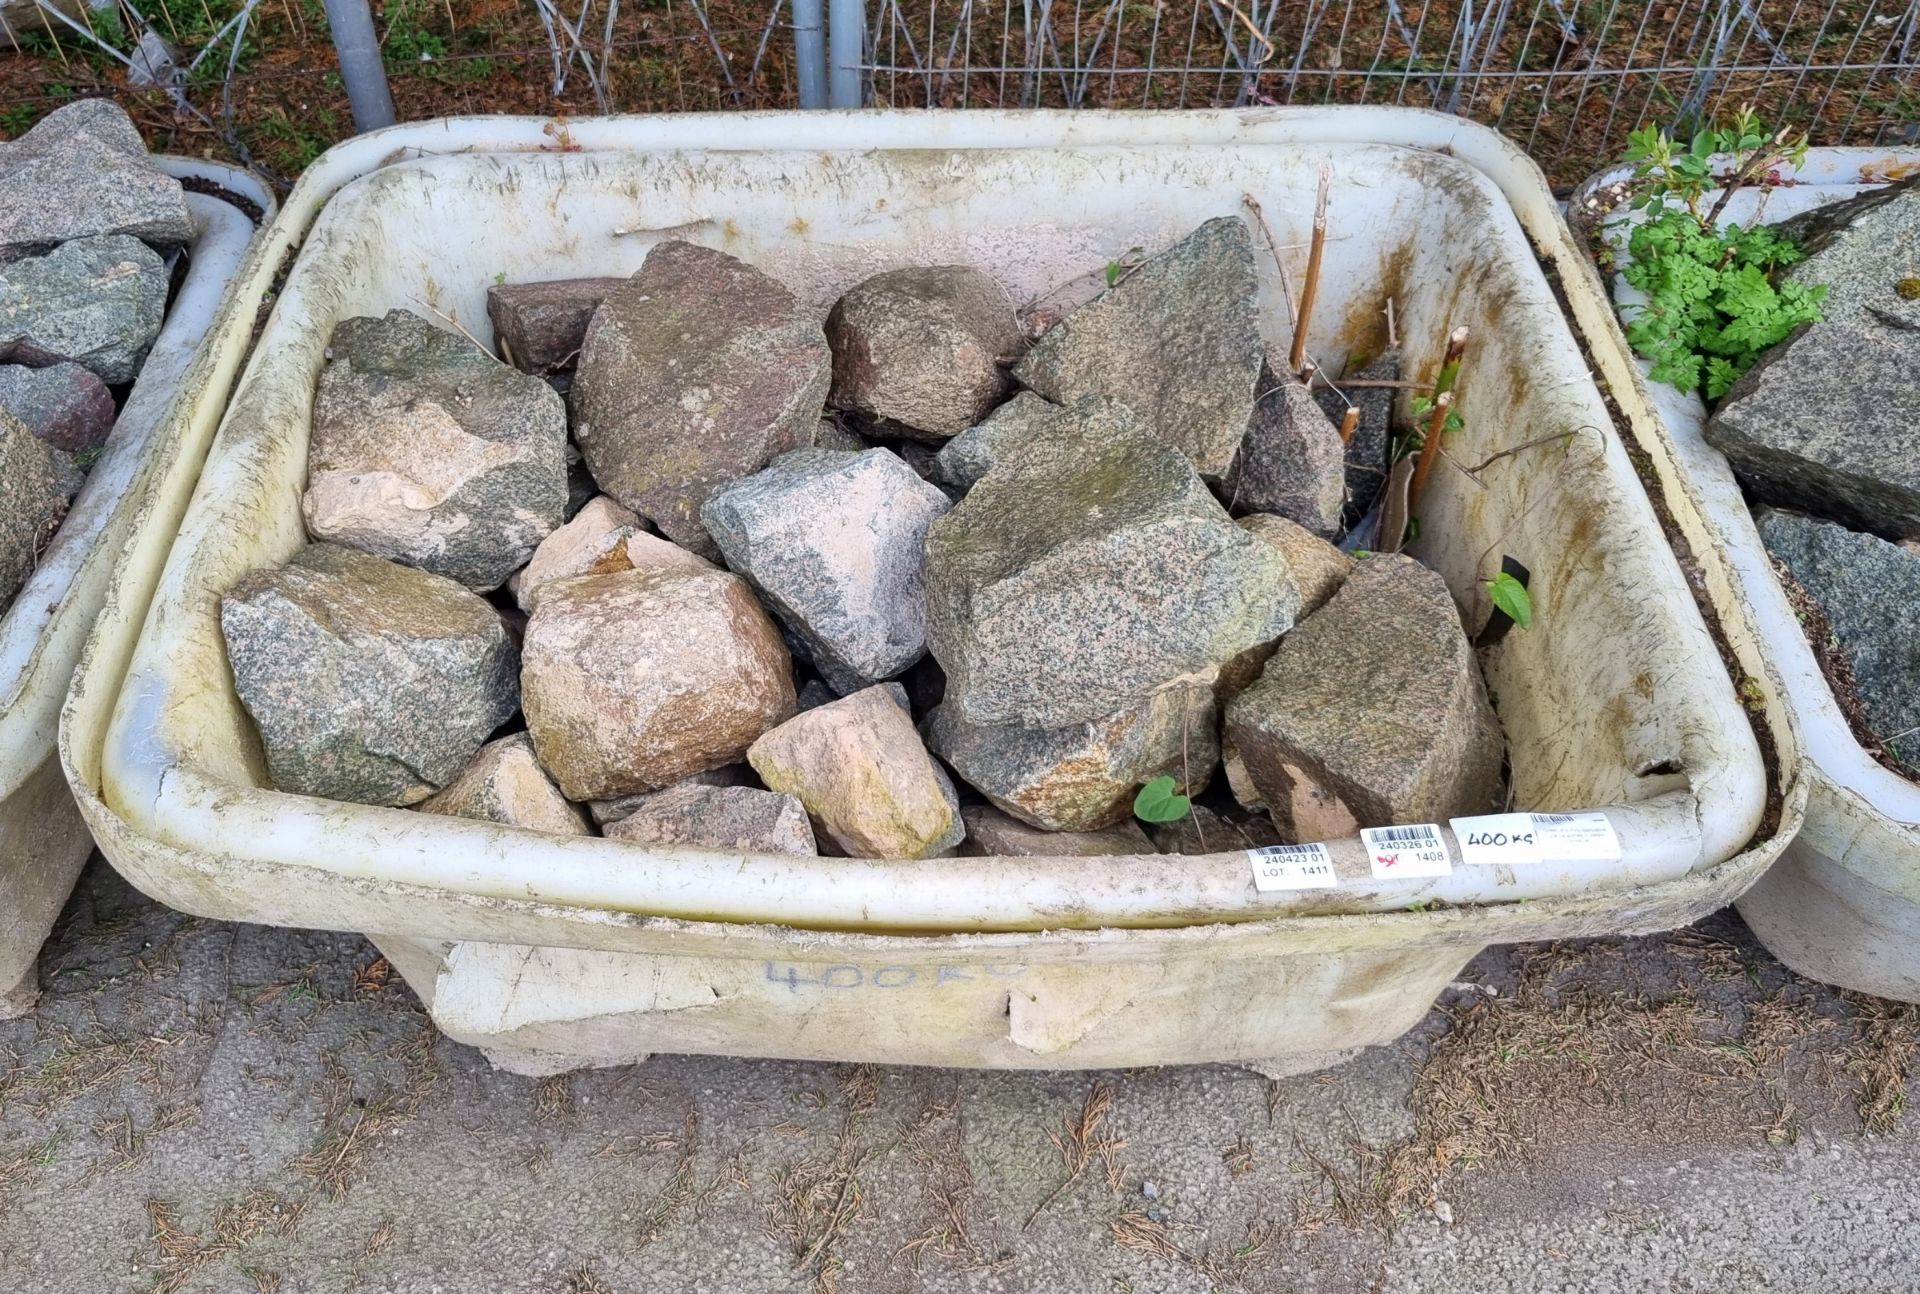 Green and Pink decorative granite stones in plastic container - 400kg - Image 2 of 3